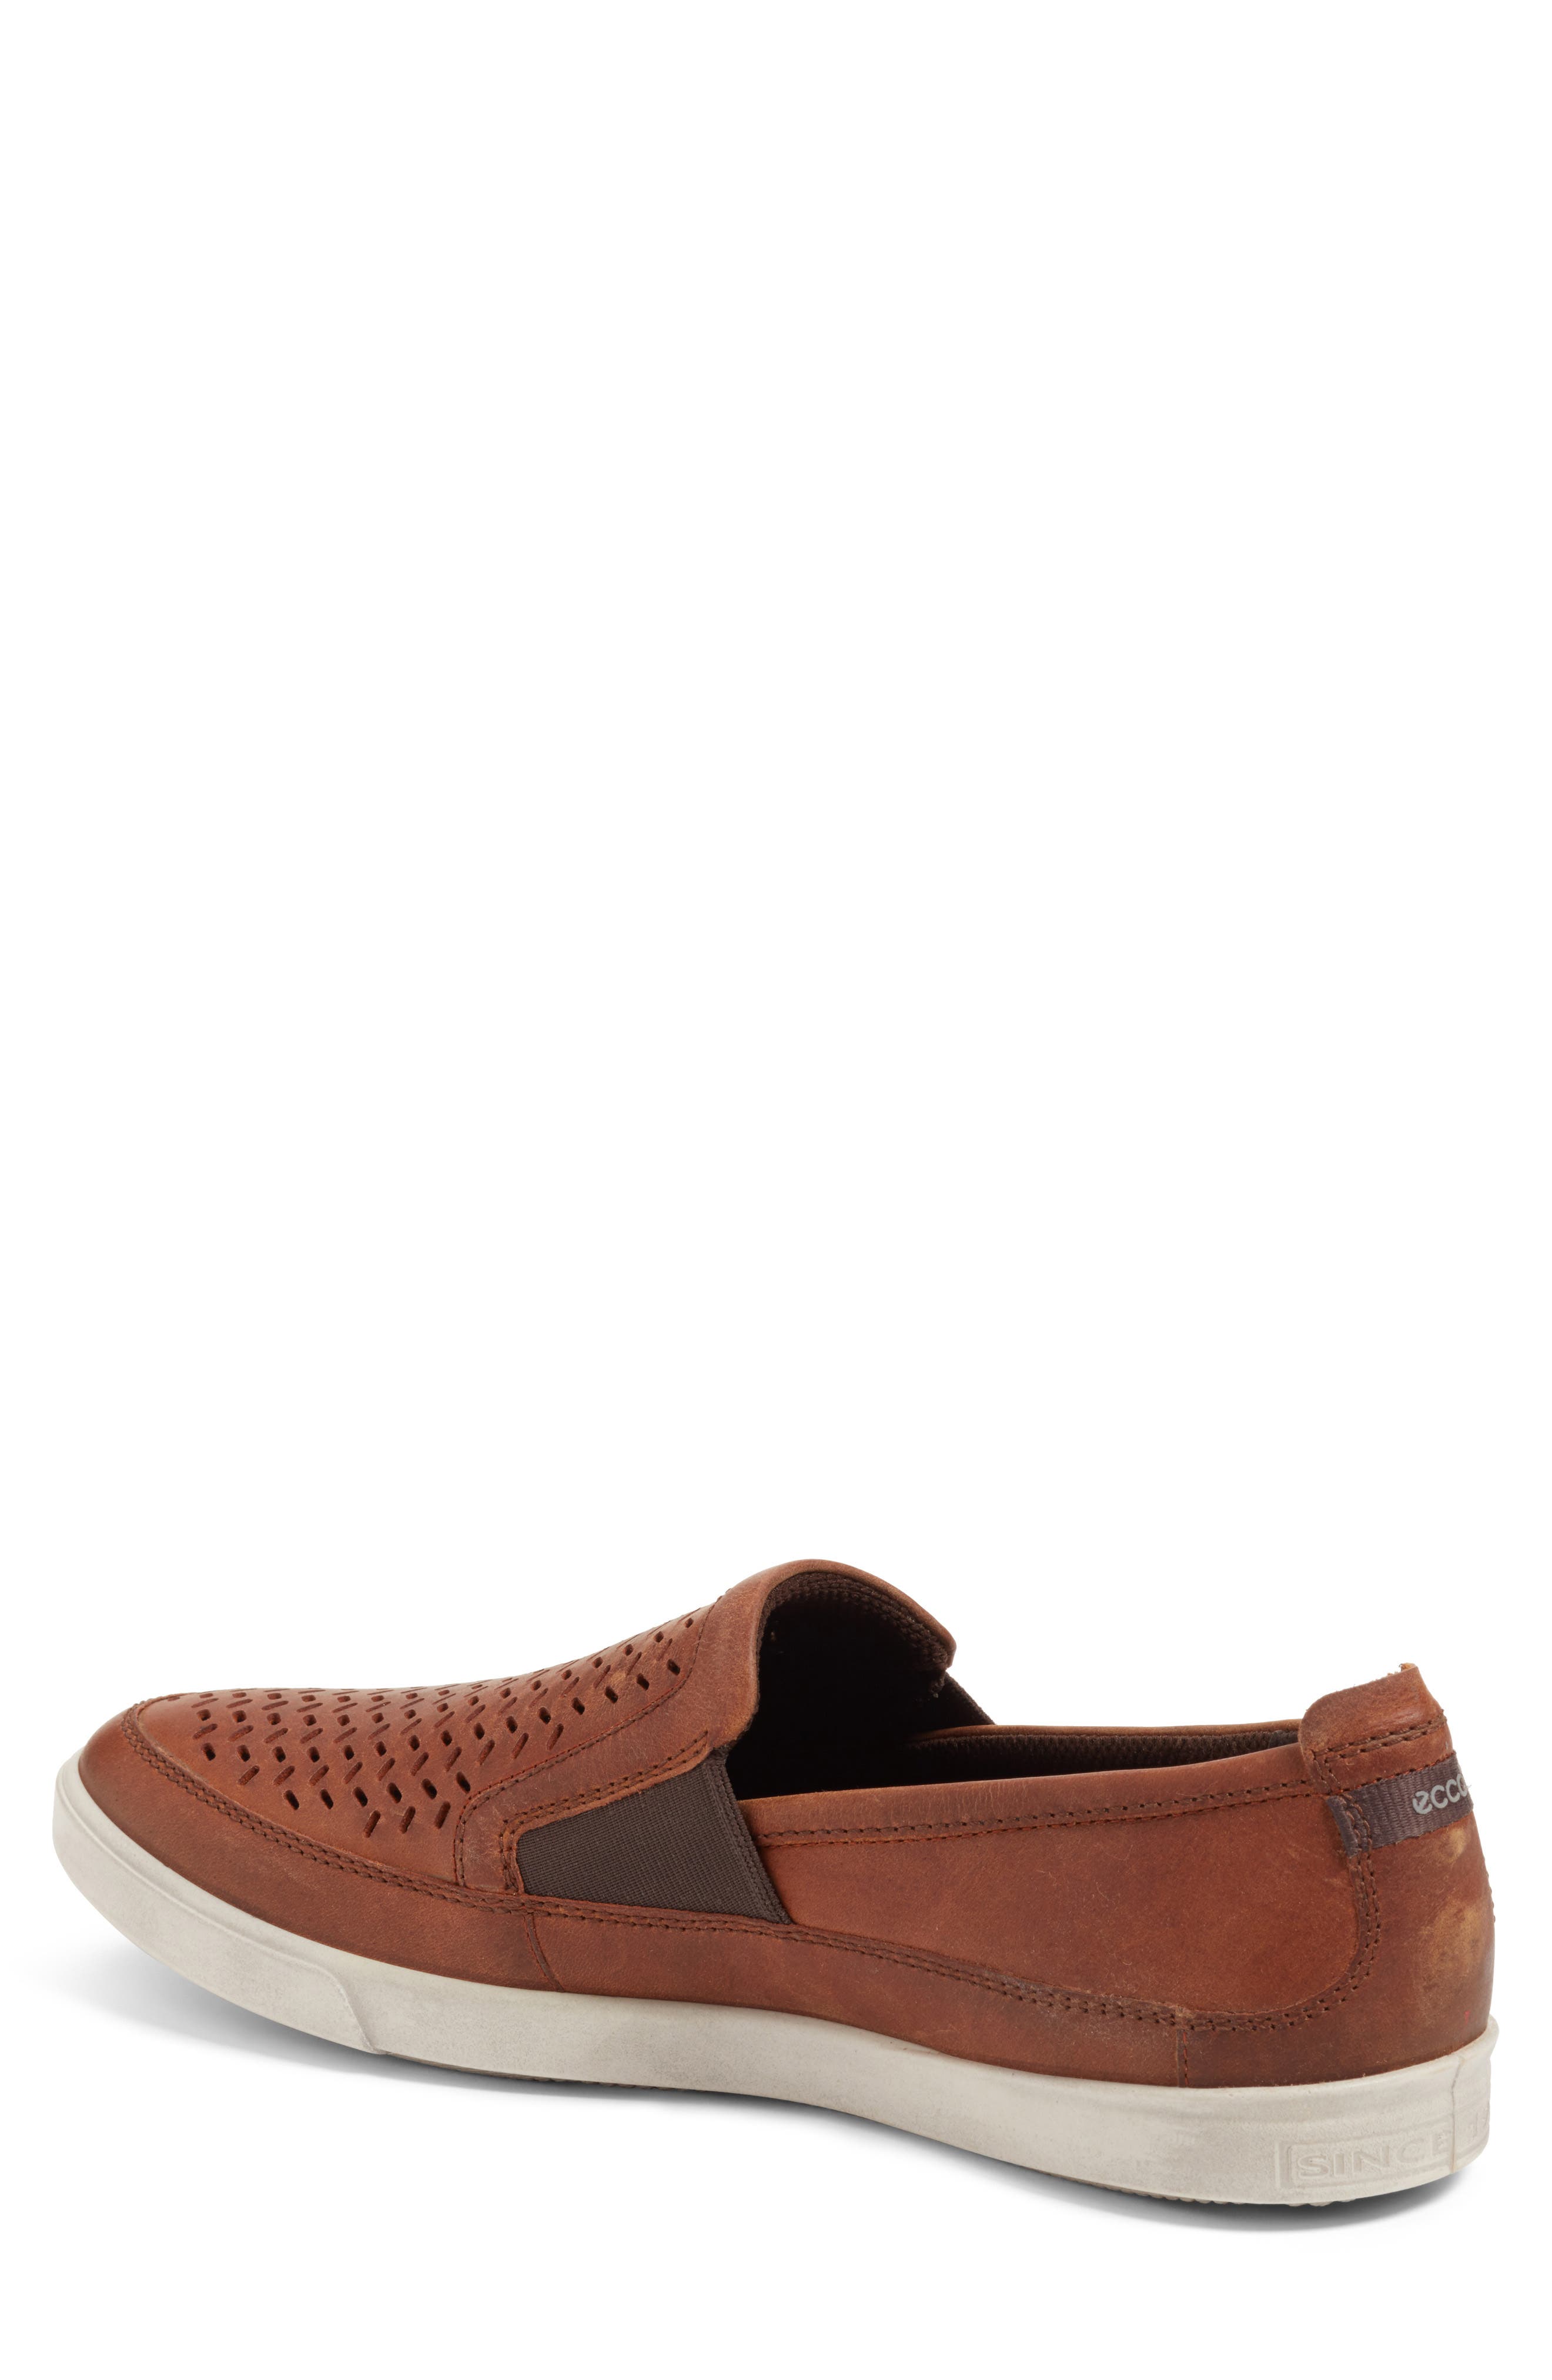 ecco perforated slip on